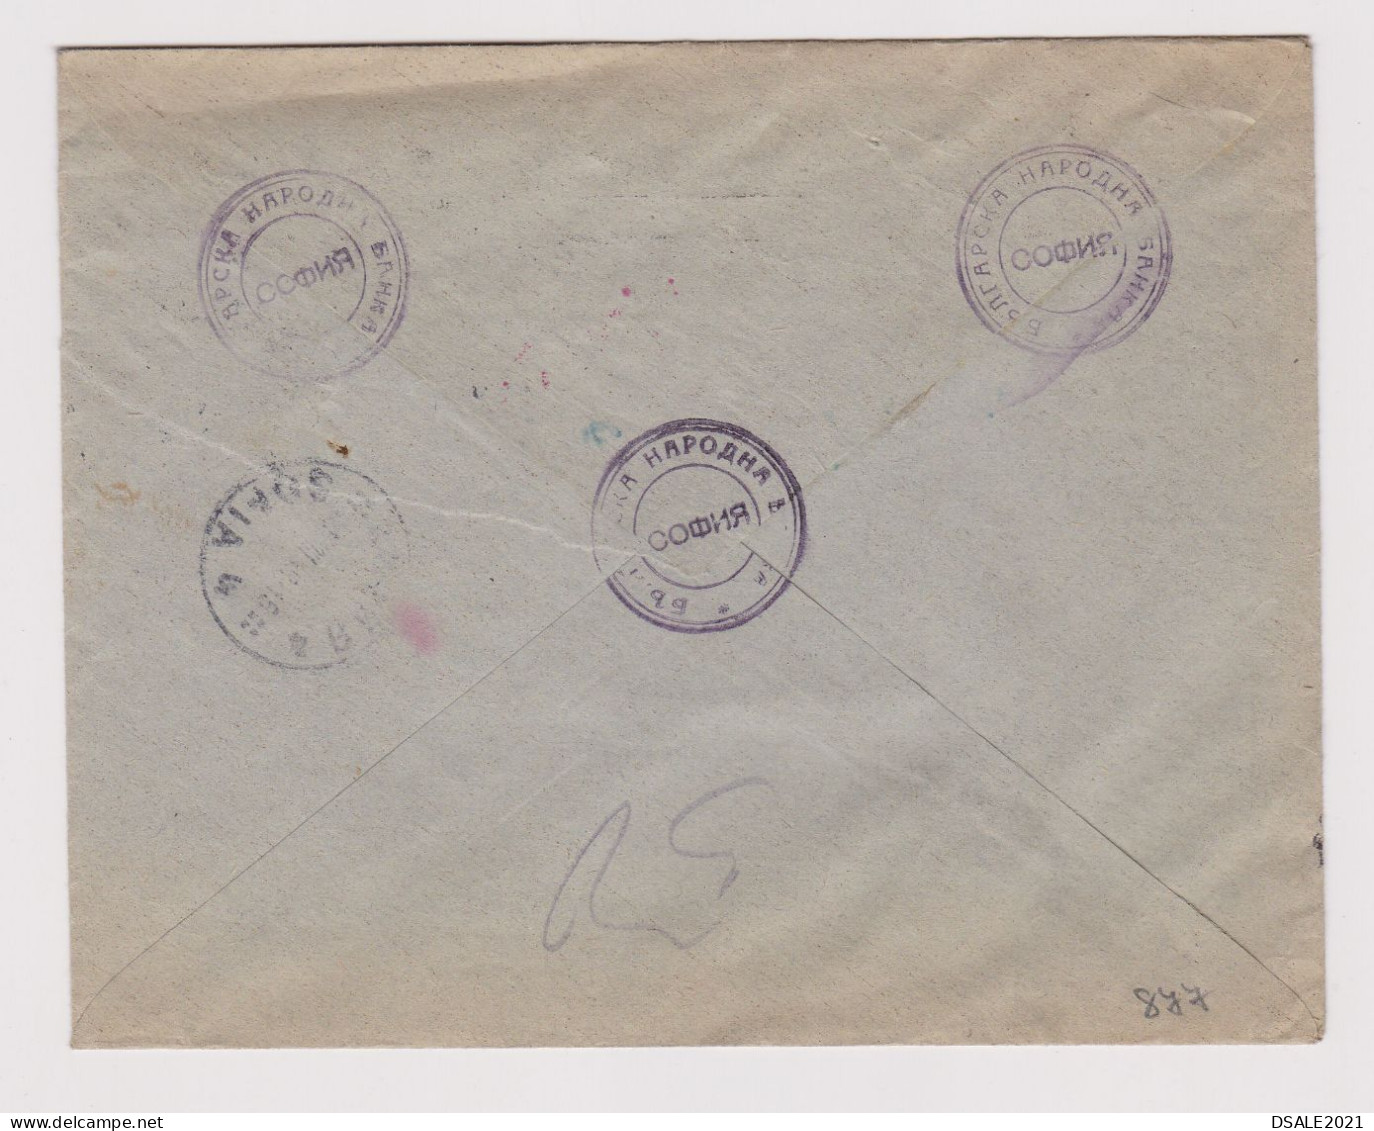 Bulgaria Bulgarien 1940s Registered Bank Cover With Perfin, Topic Stamps, Domestic Used Rare (877) - Briefe U. Dokumente